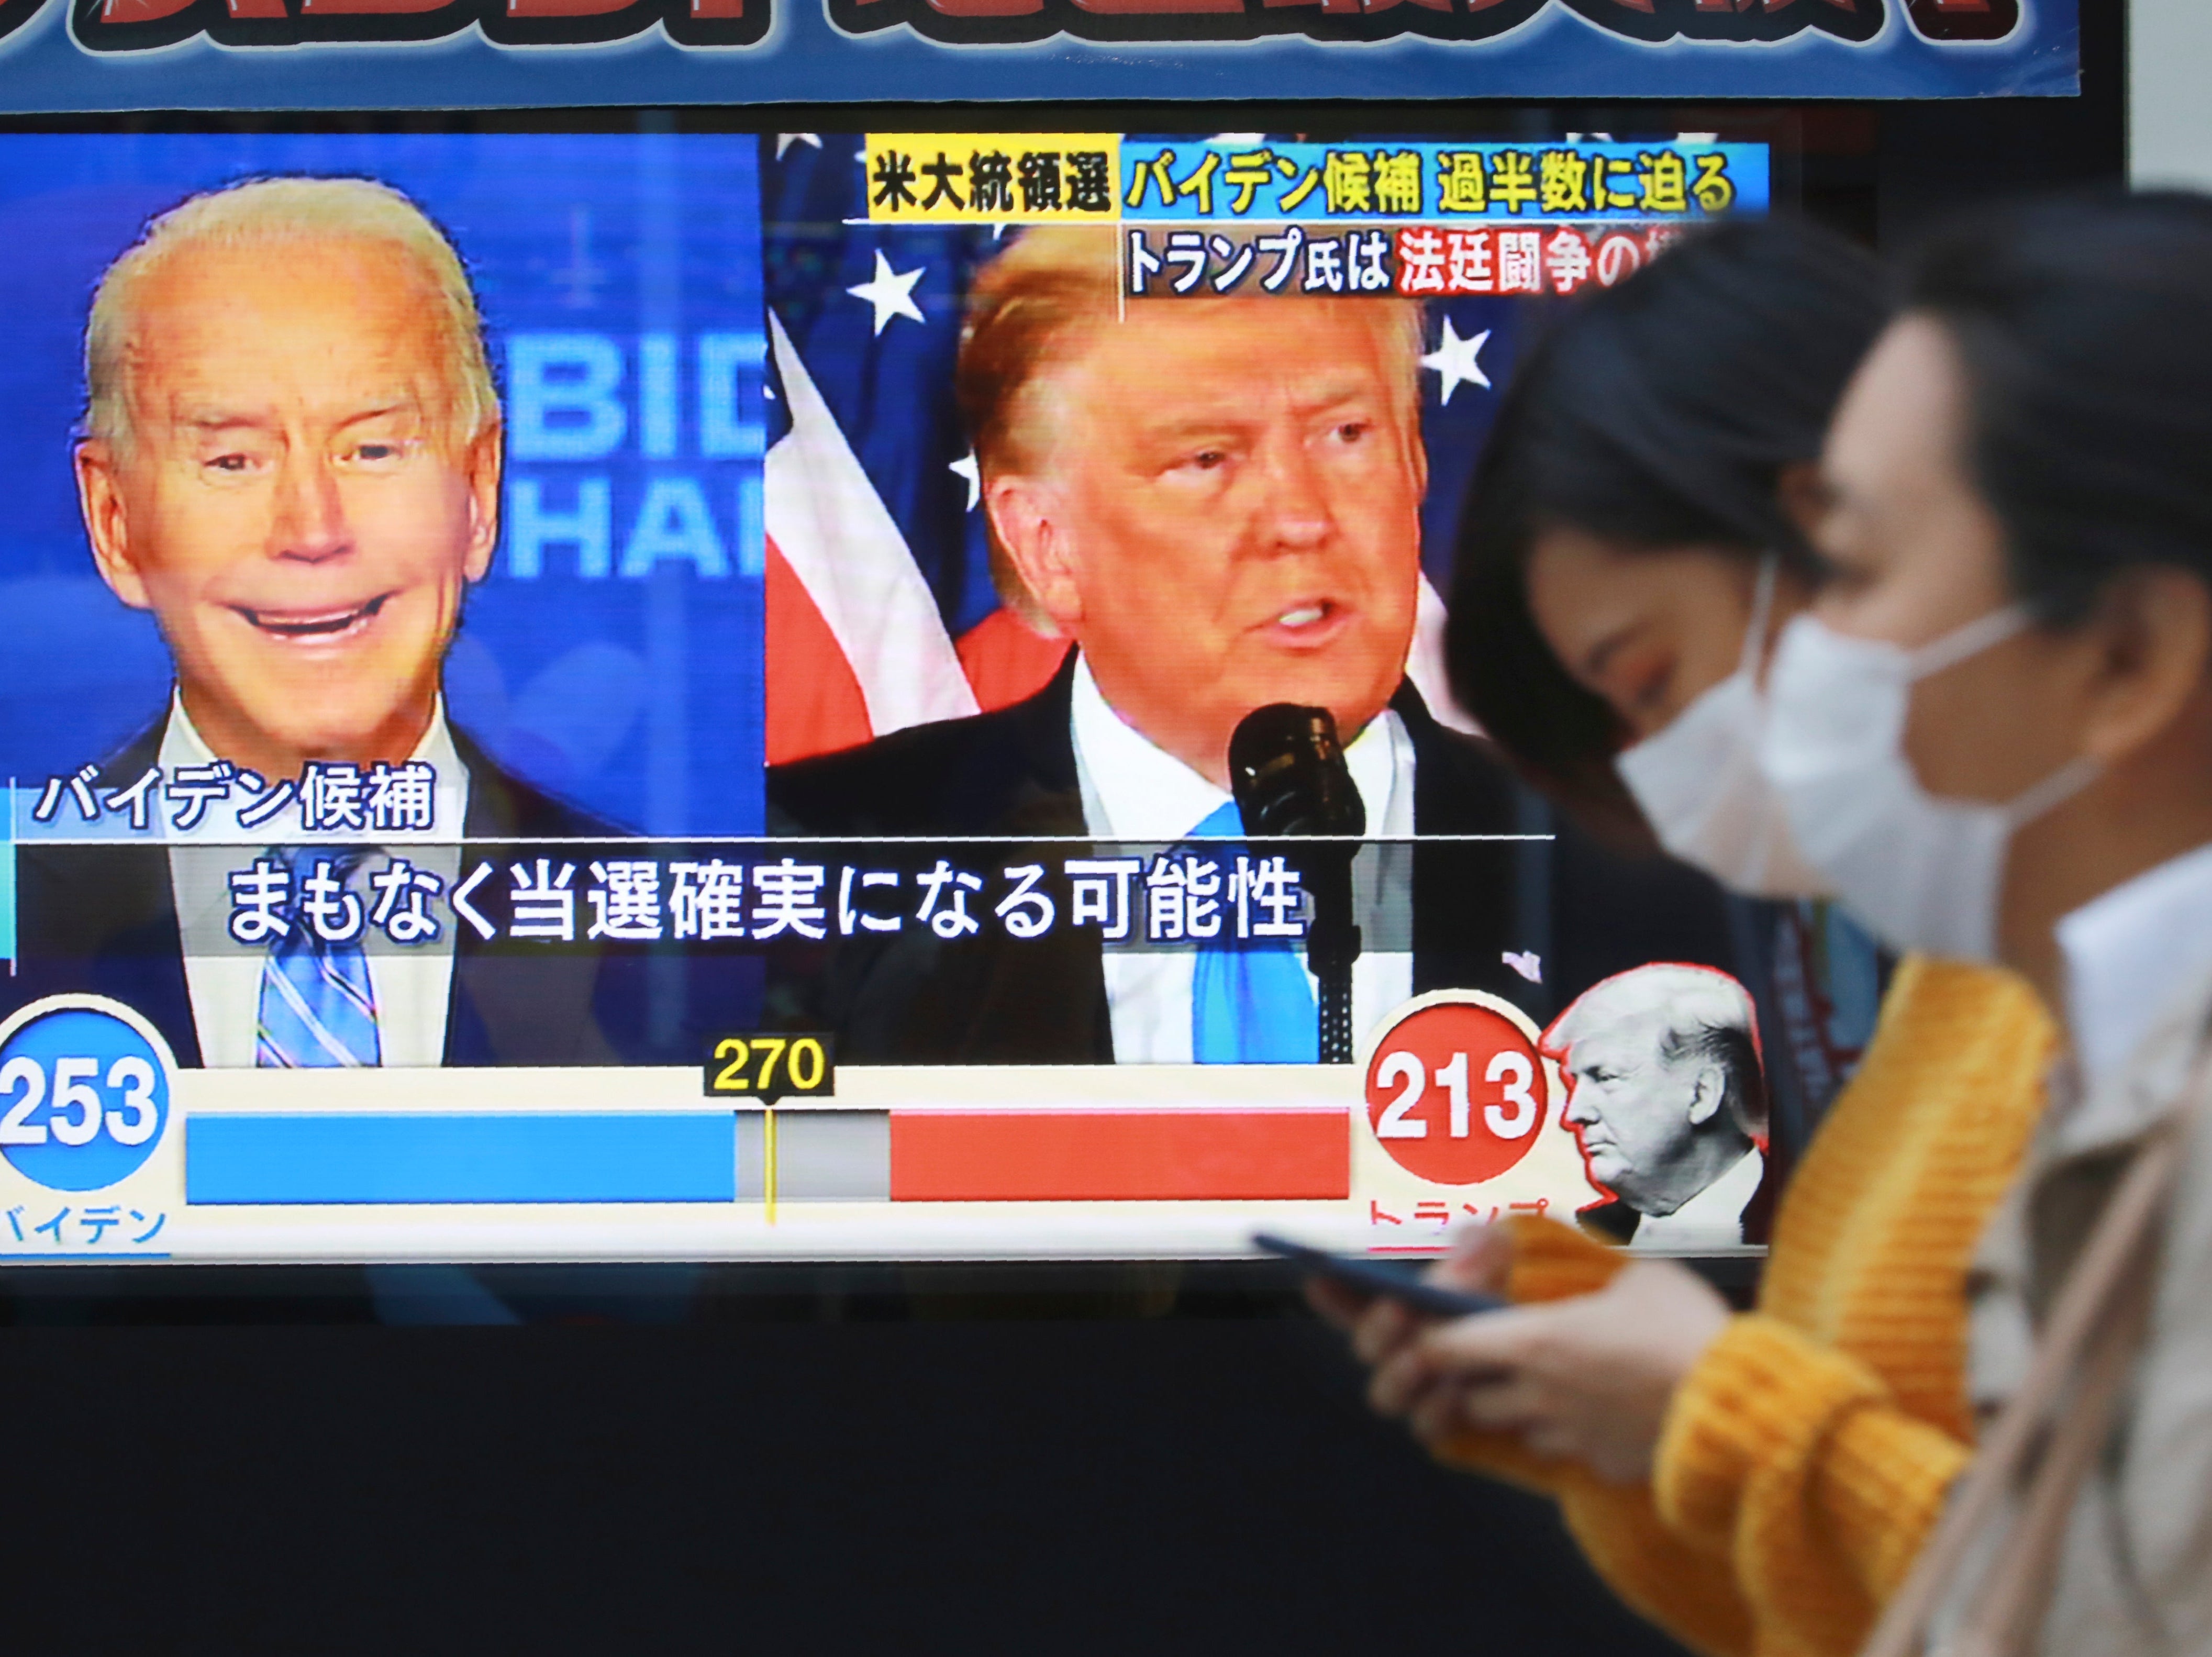 City goers pass a TV screen reporting on the US election in Tokyo